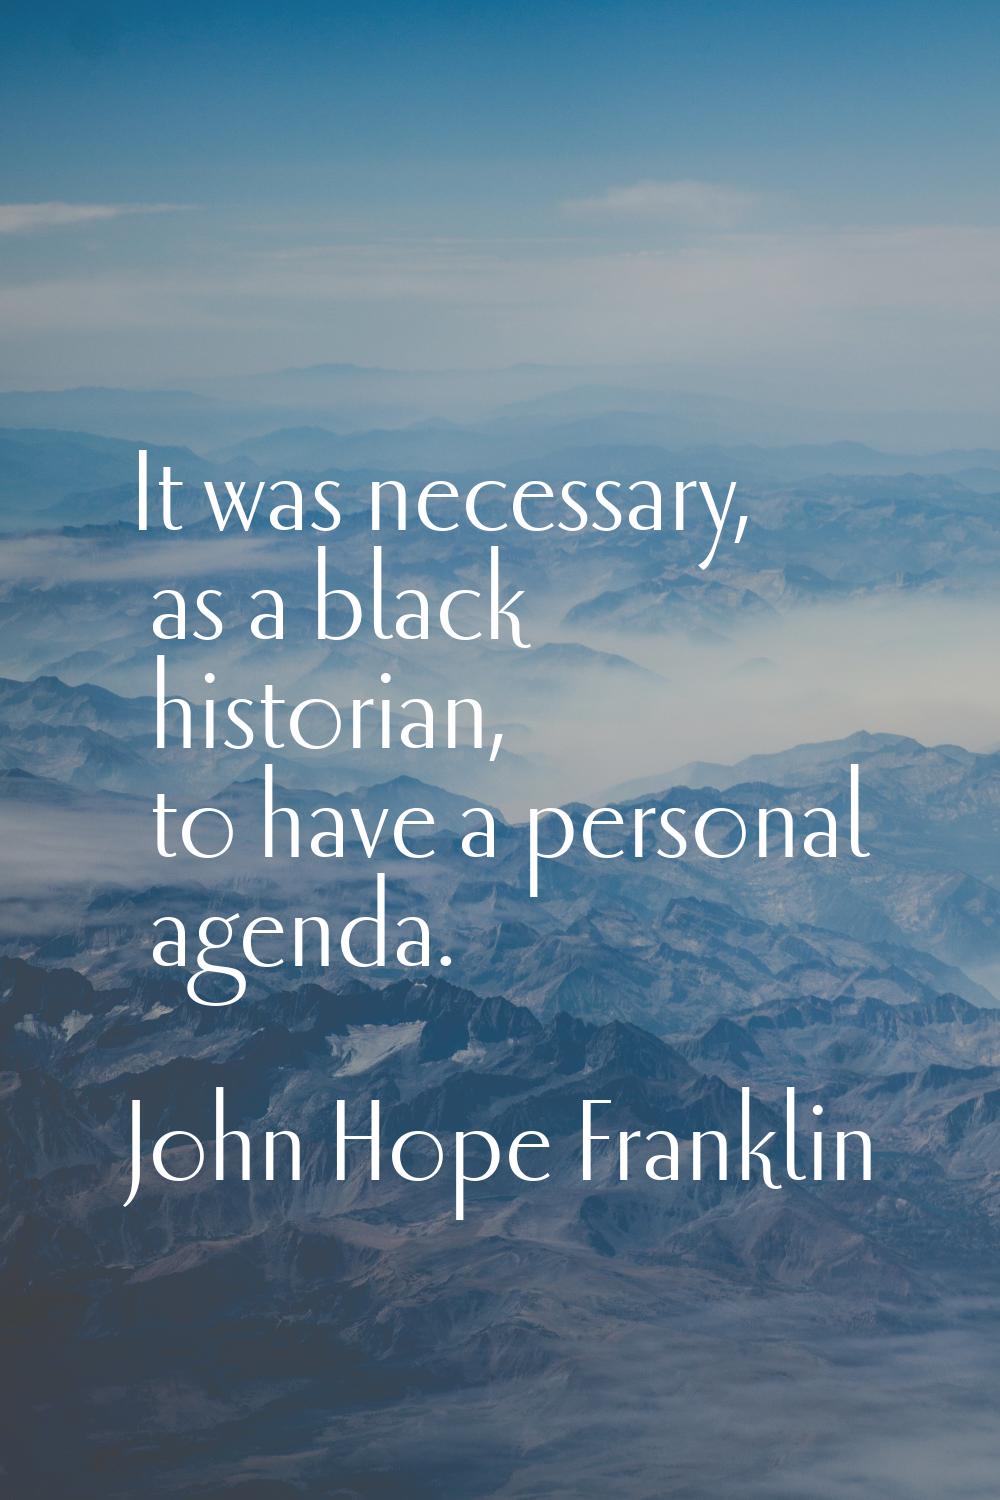 It was necessary, as a black historian, to have a personal agenda.